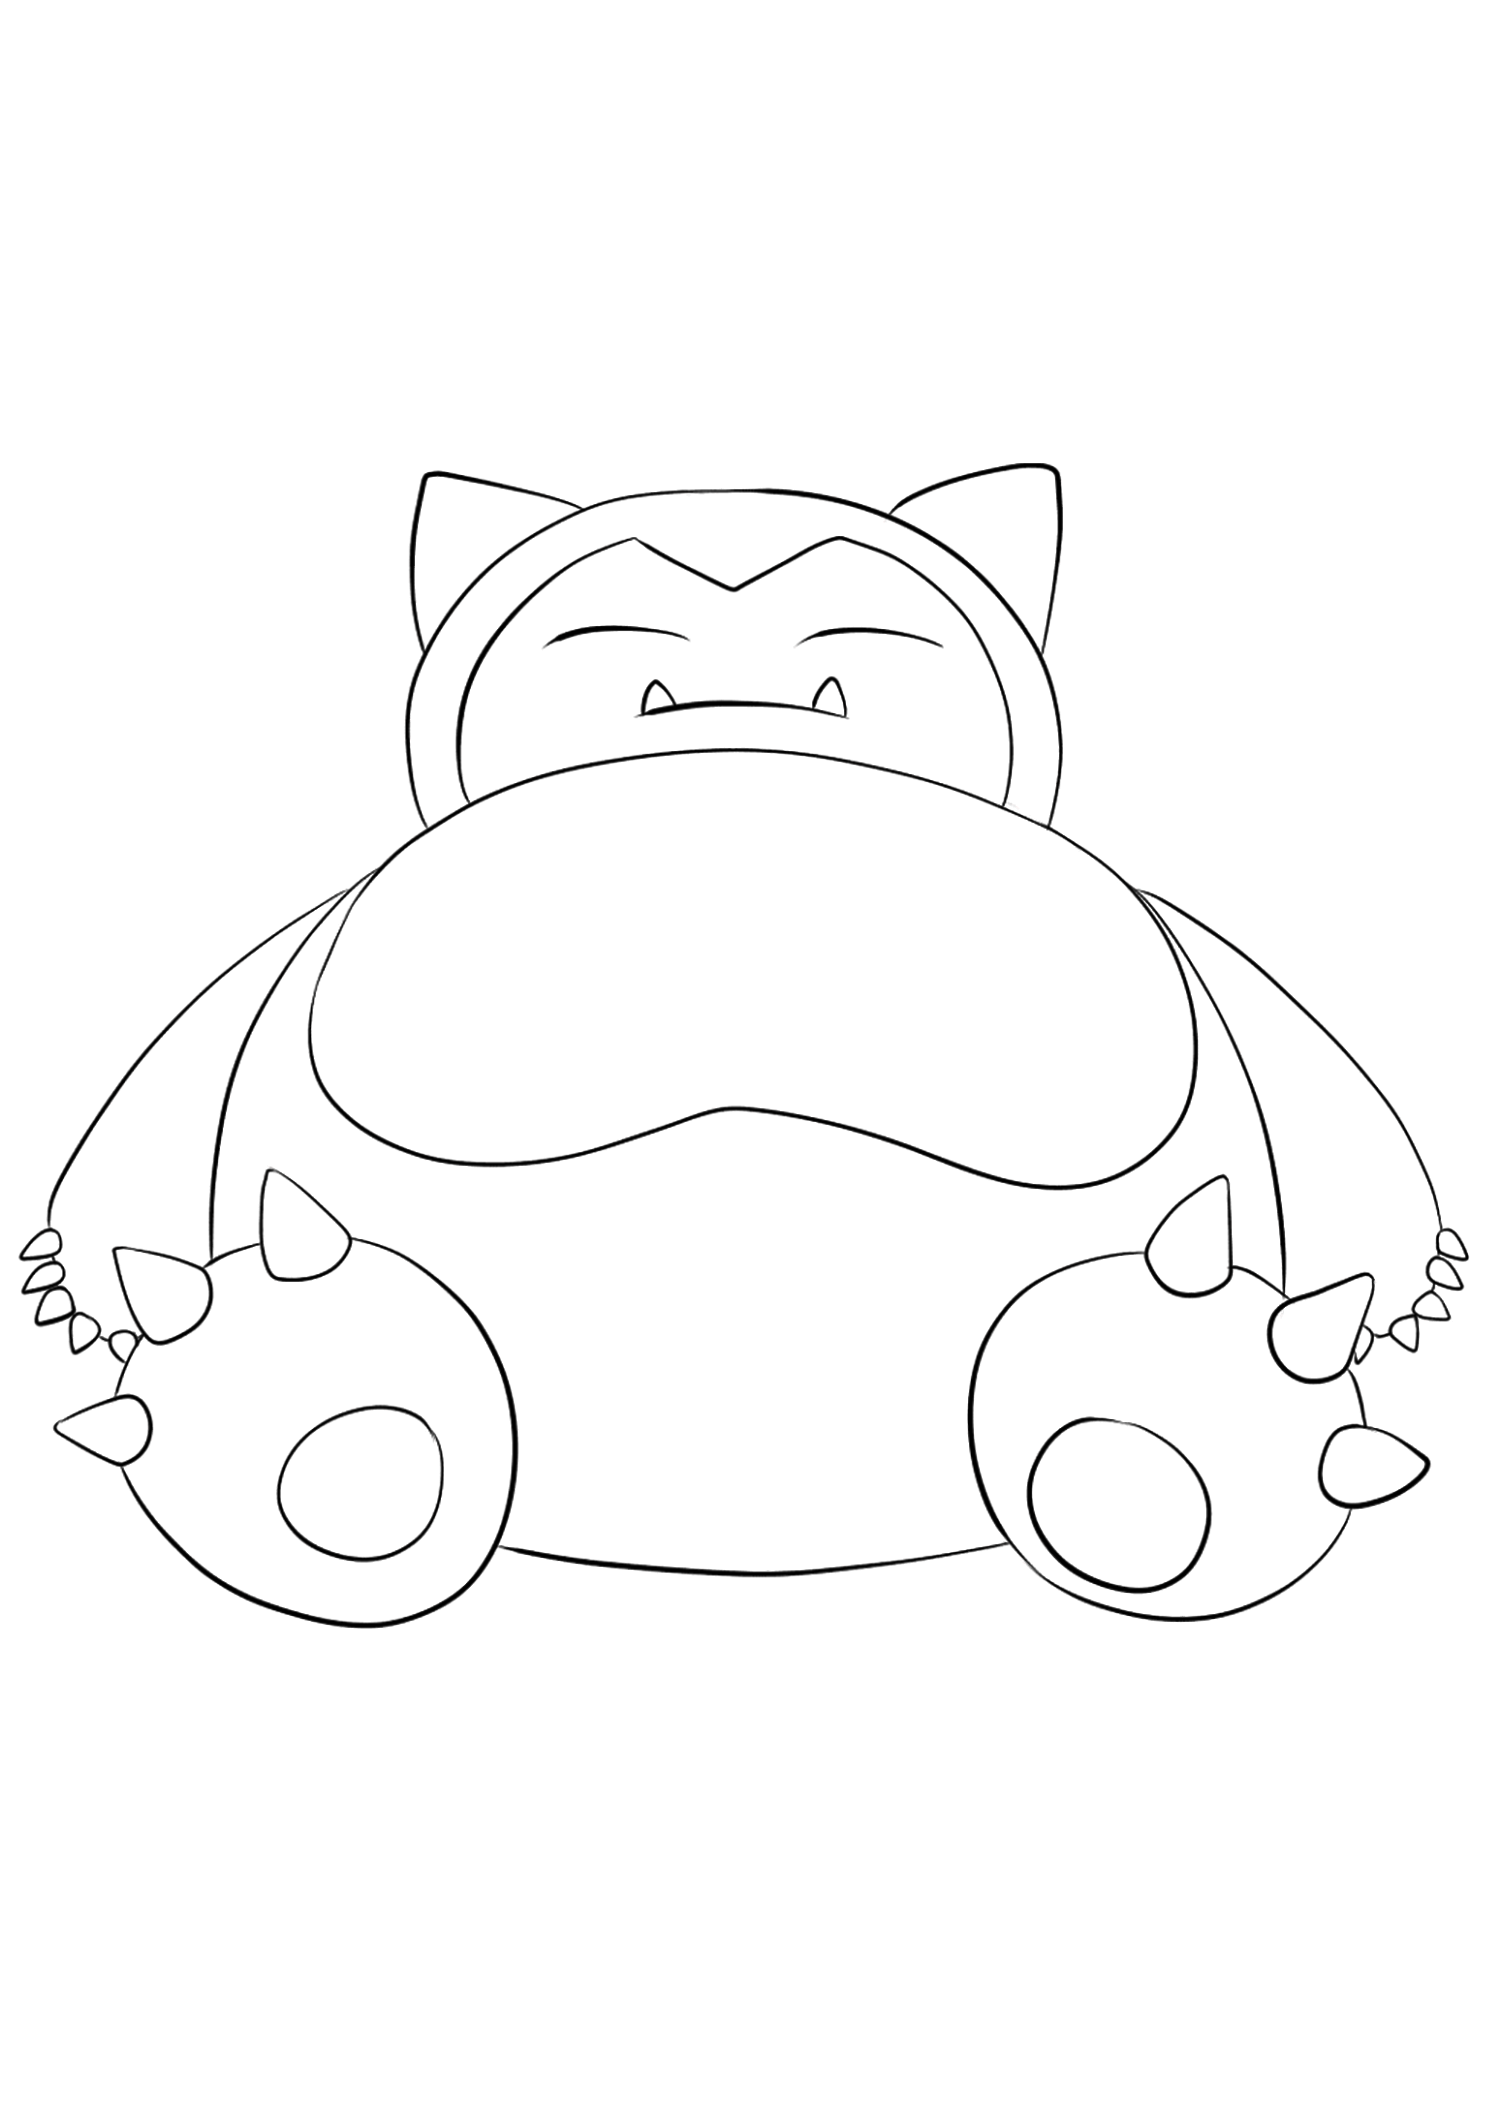 Snorlax (No.143)Snorlax Coloring page, Generation I Pokemon of type NormalOriginal image credit: Pokemon linearts by Lilly Gerbil on Deviantart.Permission:  All rights reserved © Pokemon company and Ken Sugimori.